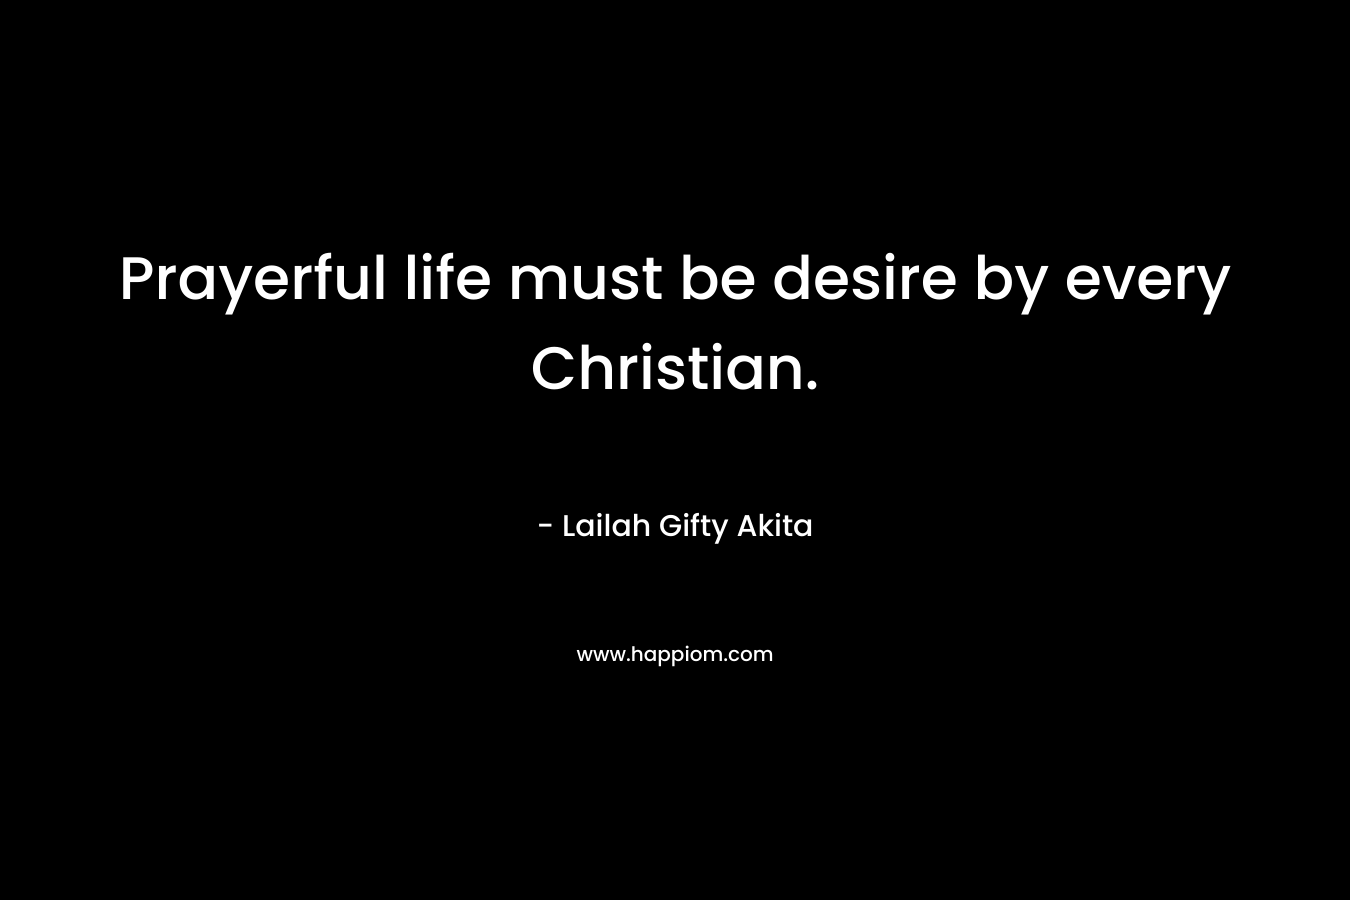 Prayerful life must be desire by every Christian.